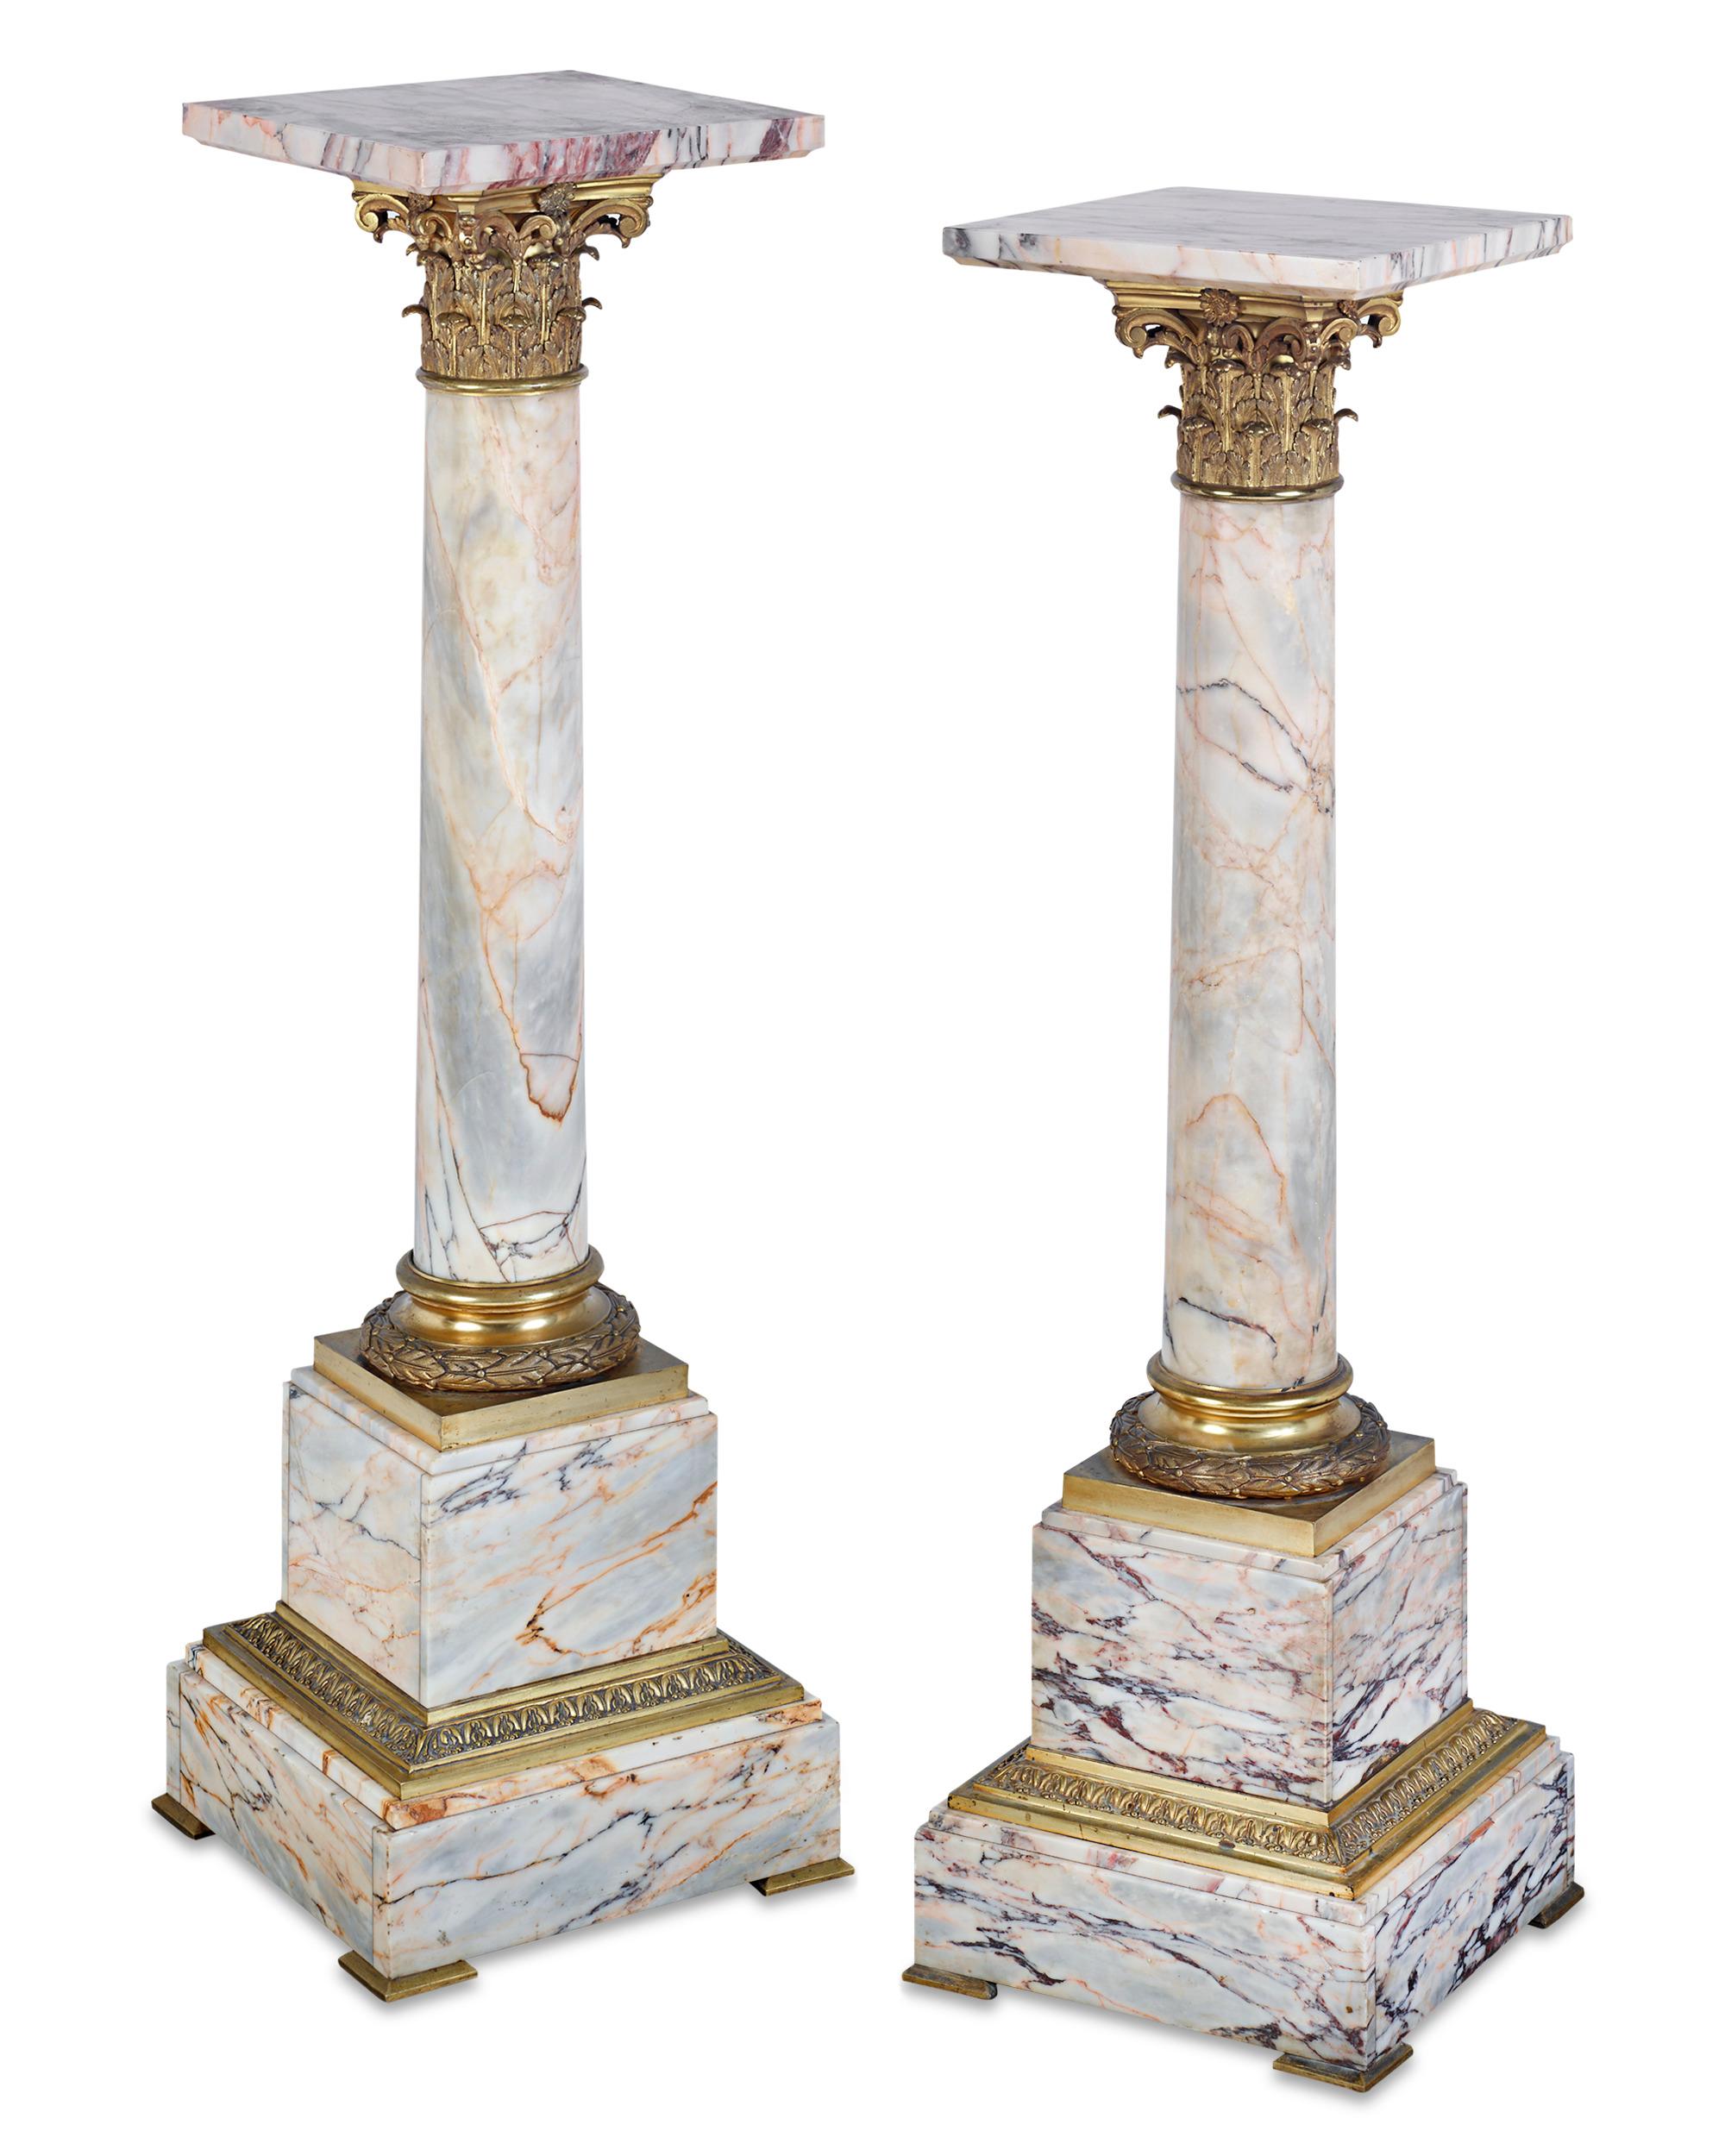 A classic Neoclassical style sets apart this stately pair of colorfully-veined white marble pedestals. Taking the form of Corinthian columns with brilliant gilt bronze capitals, the impressive pieces can serve as display pedestals or as stunning